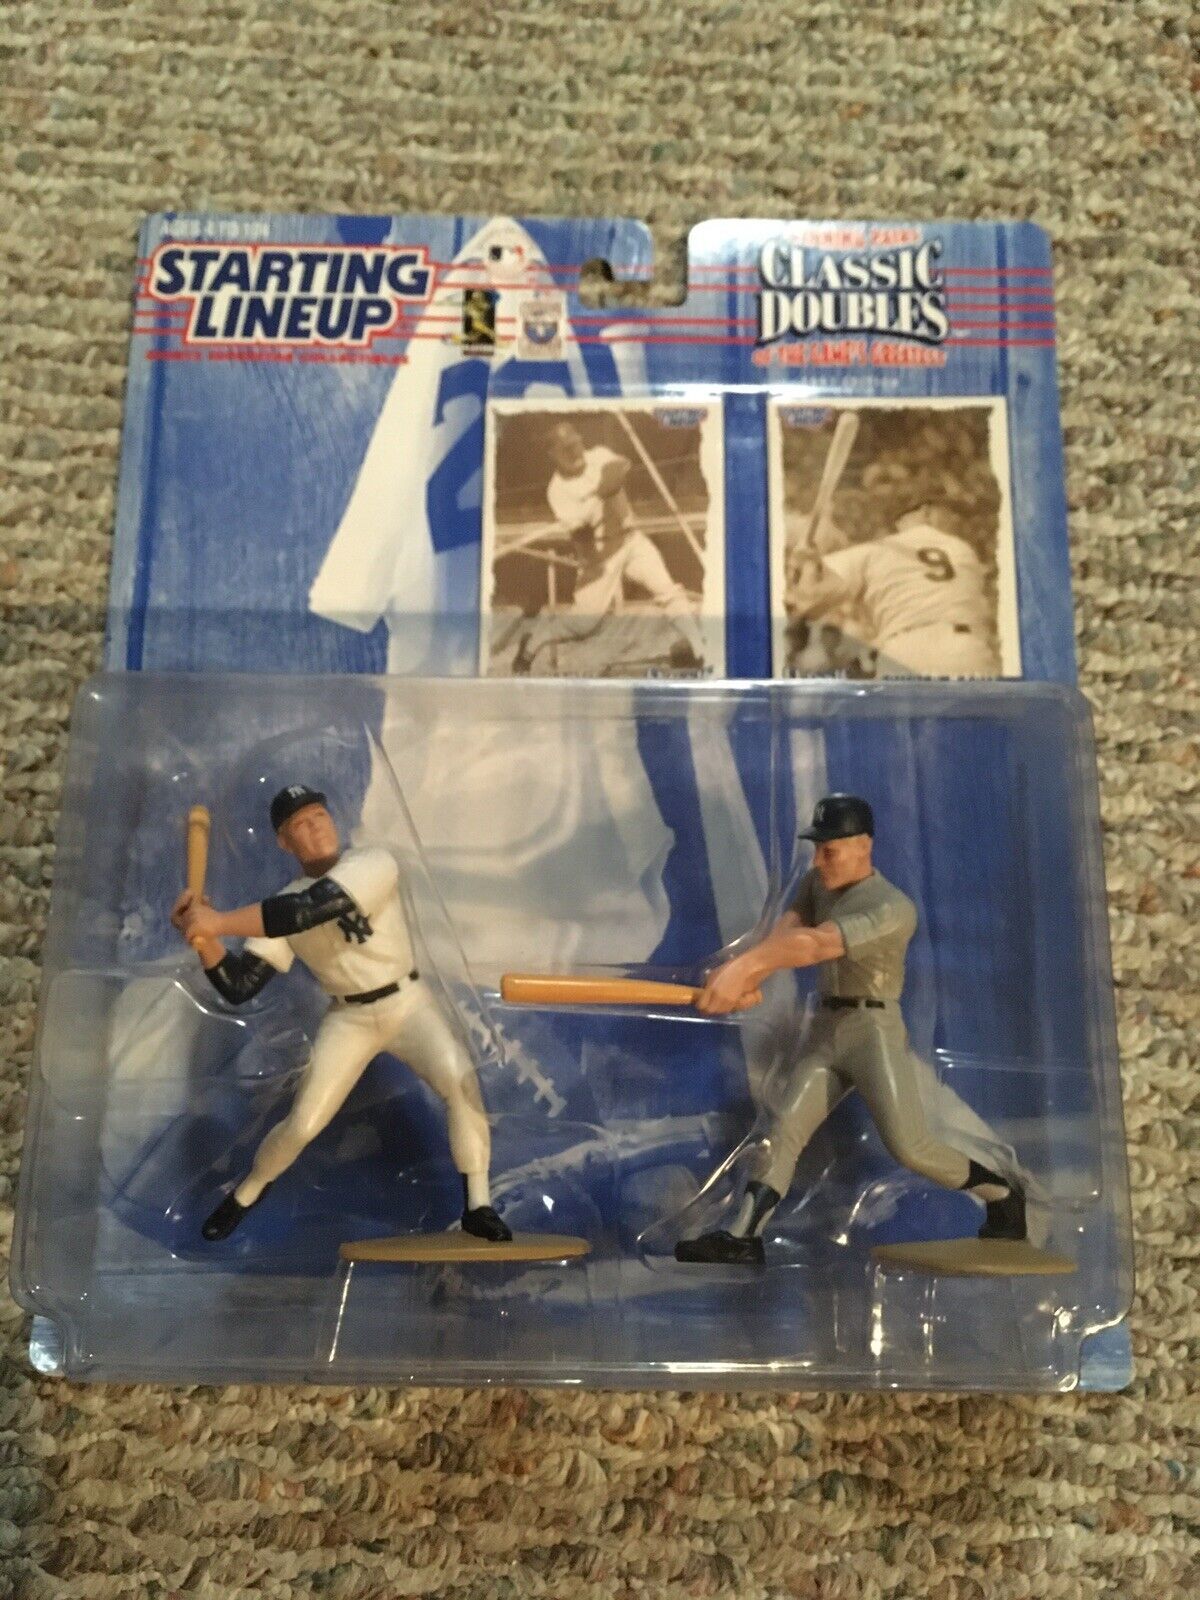 Primary image for 1997 CLASSIC DOUBLES  MICKEY MANTLE ROGER MARIS MINT CONDITION NEW YORK YANKEES